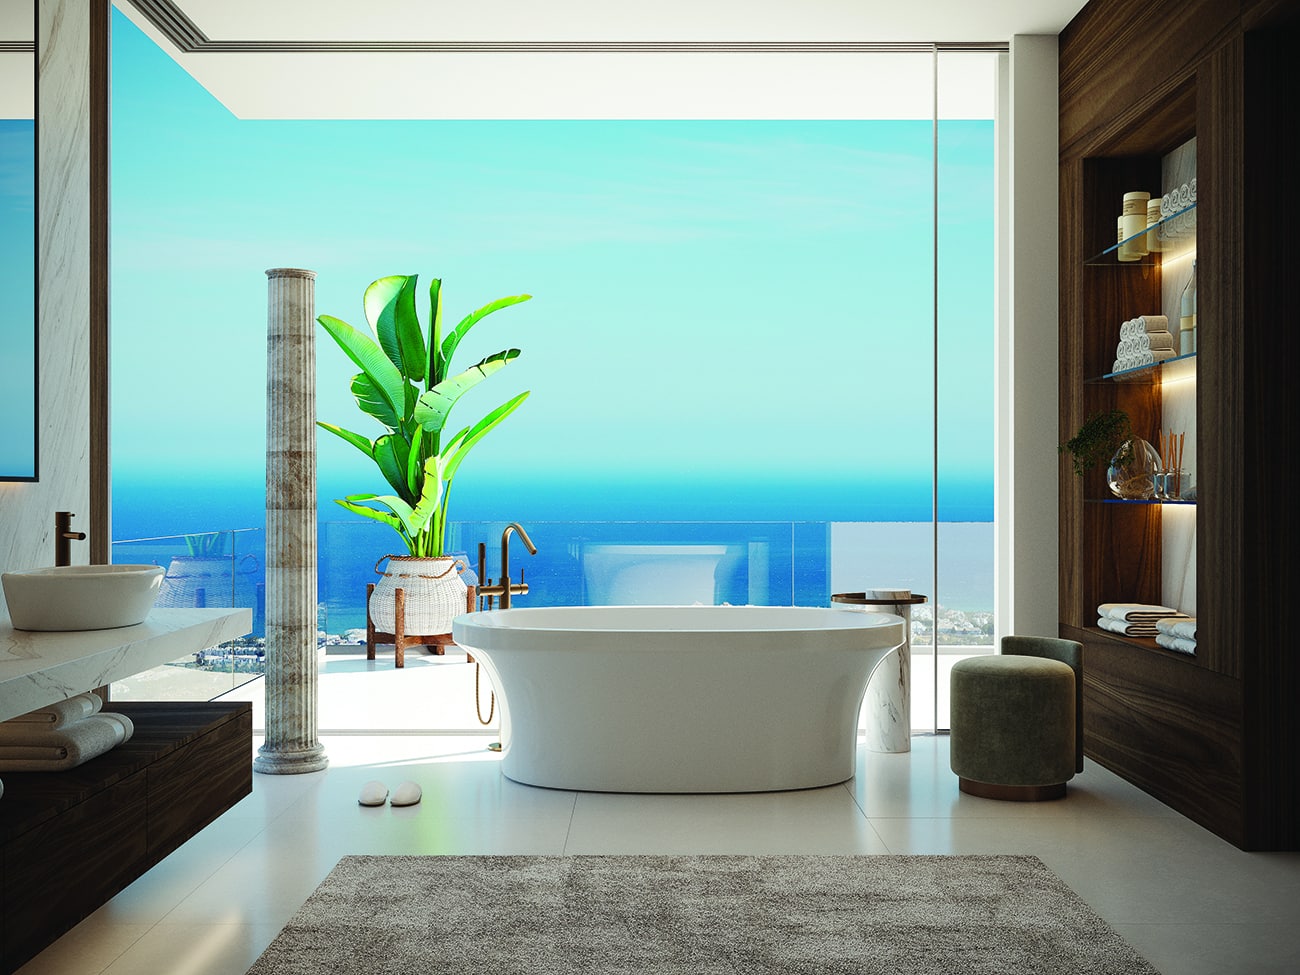 At Vista Lago Residences the view from the bath is incomparable!